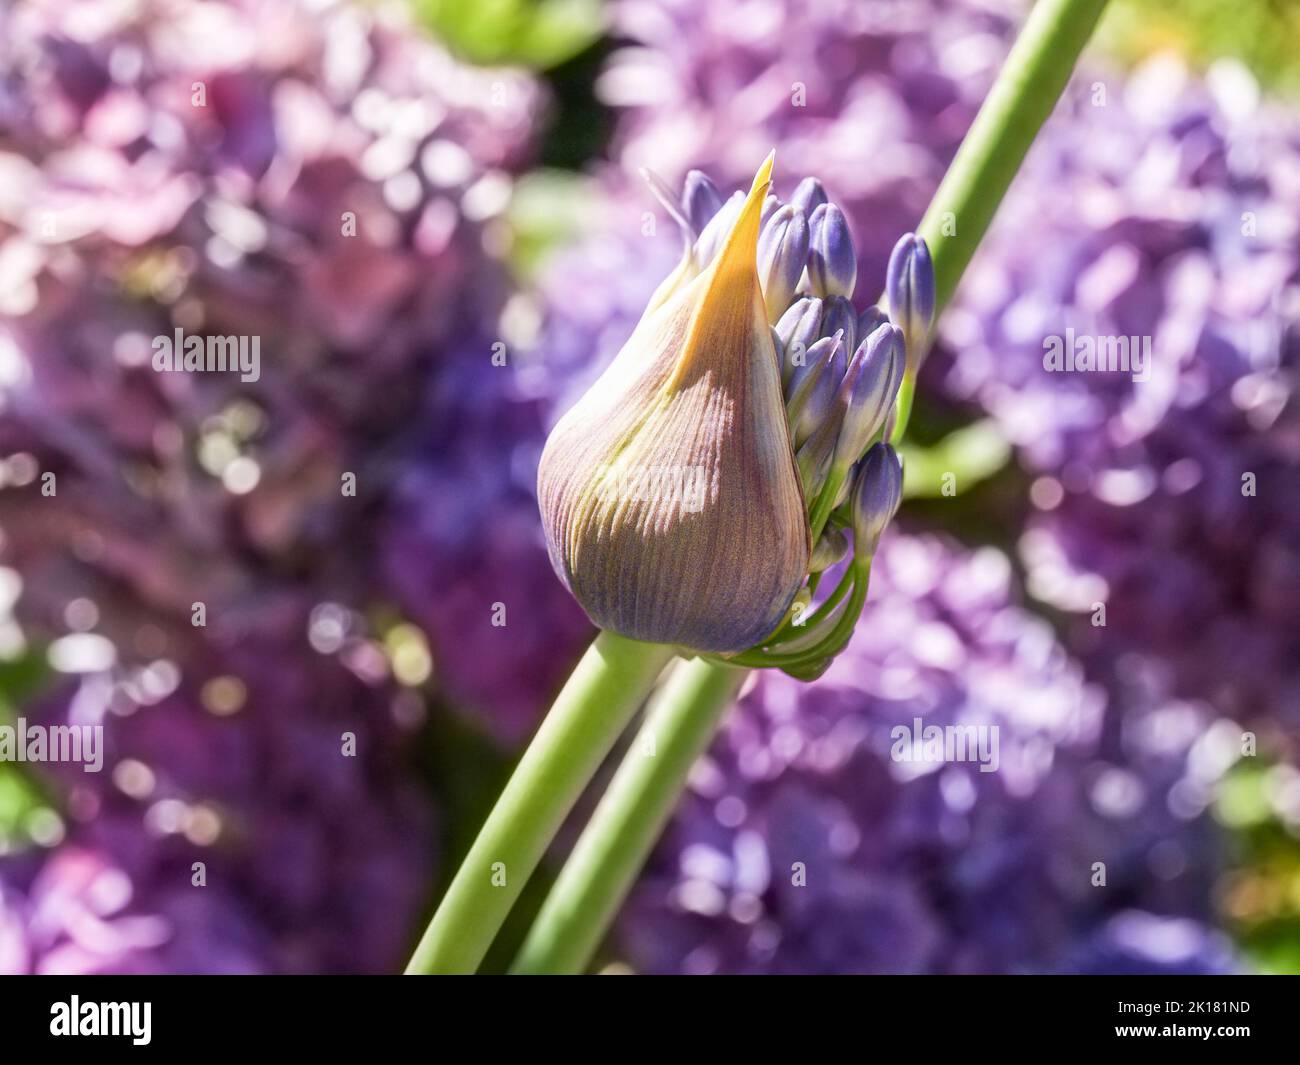 Agapantha flower bokeh background on end of stem about to bloom Stock Photo